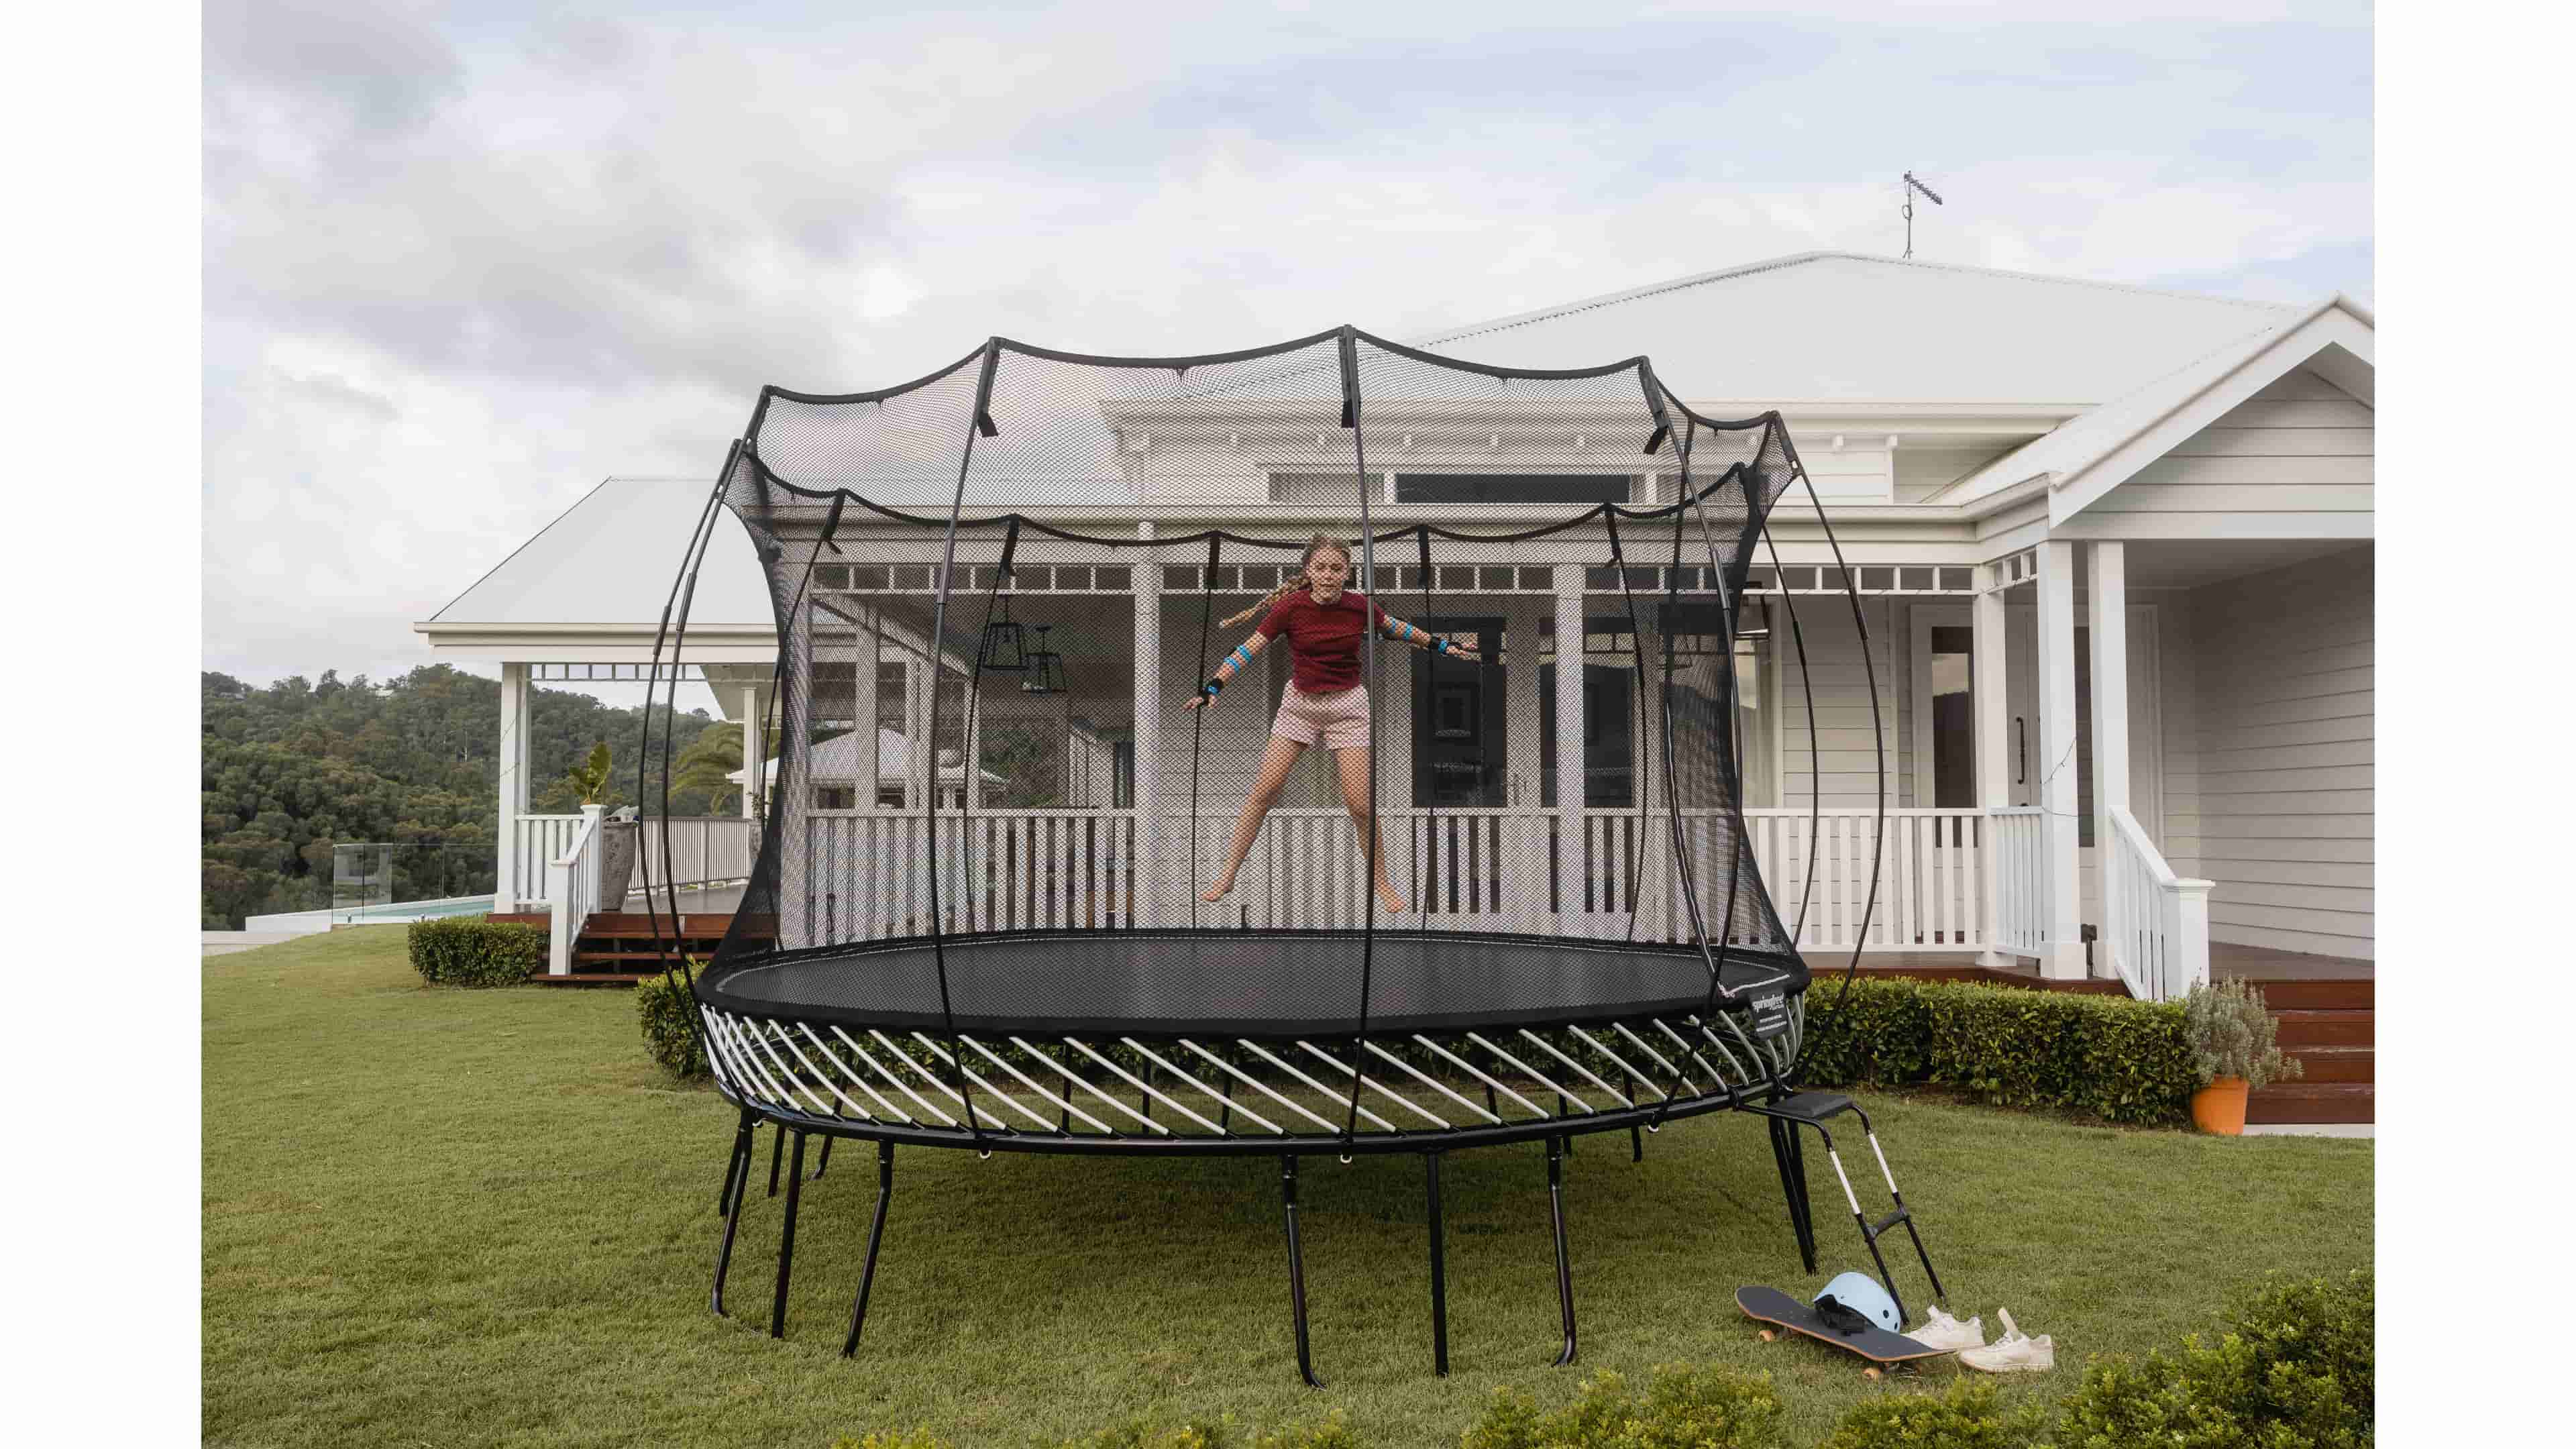 Springfree Trampoline Replacement Parts: A Complete Guide